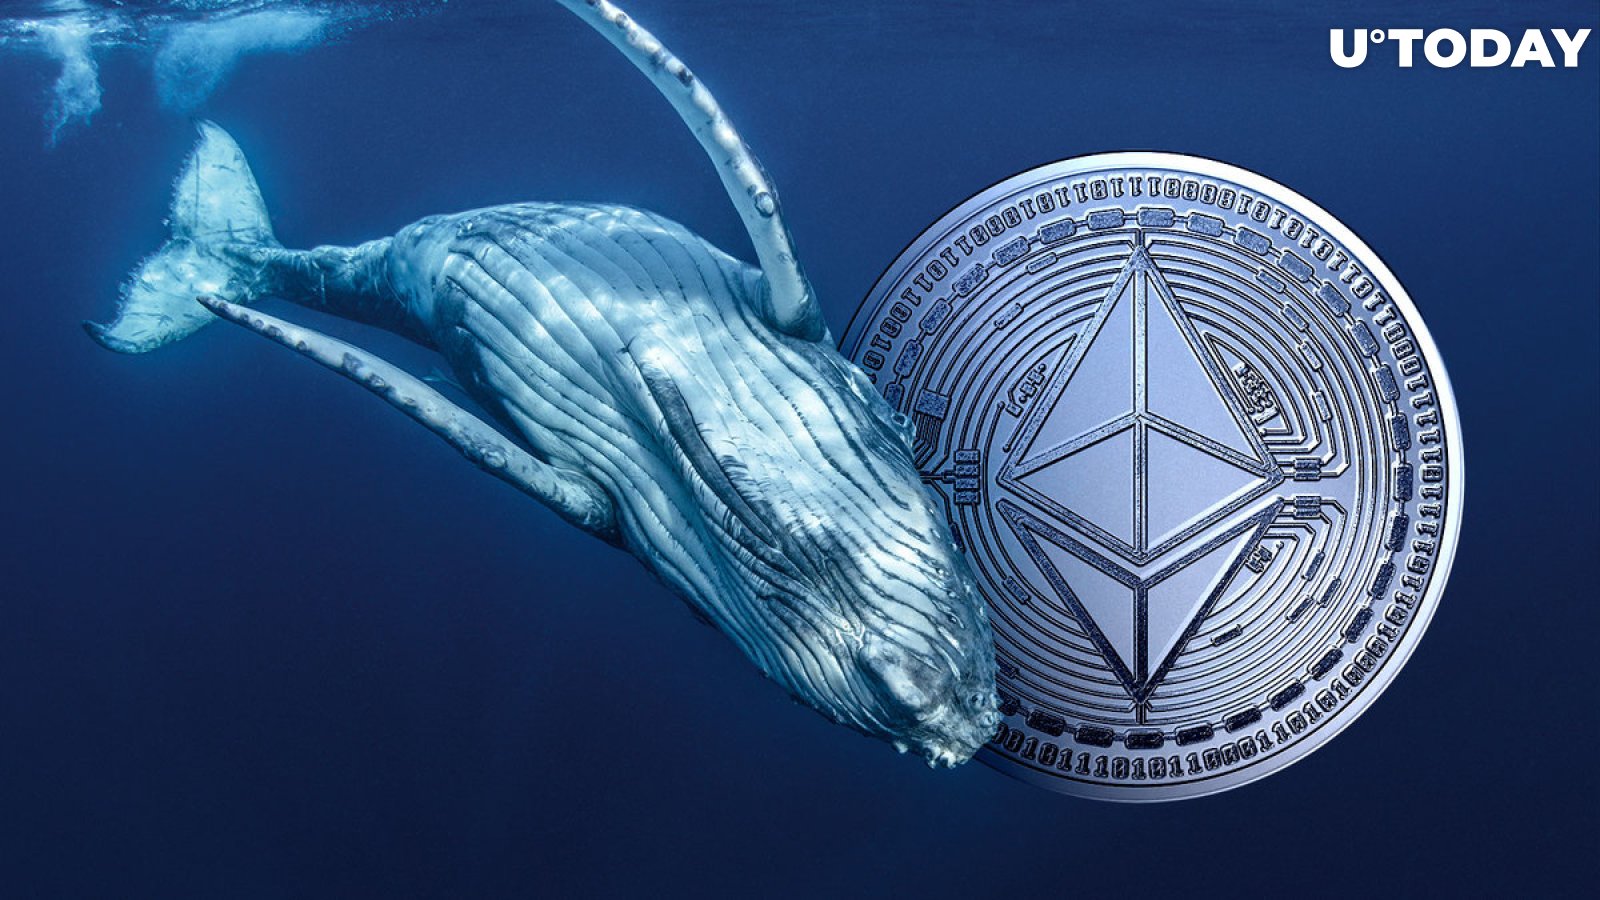 Ethereum Whales Are Panic Selling, What's Happening?